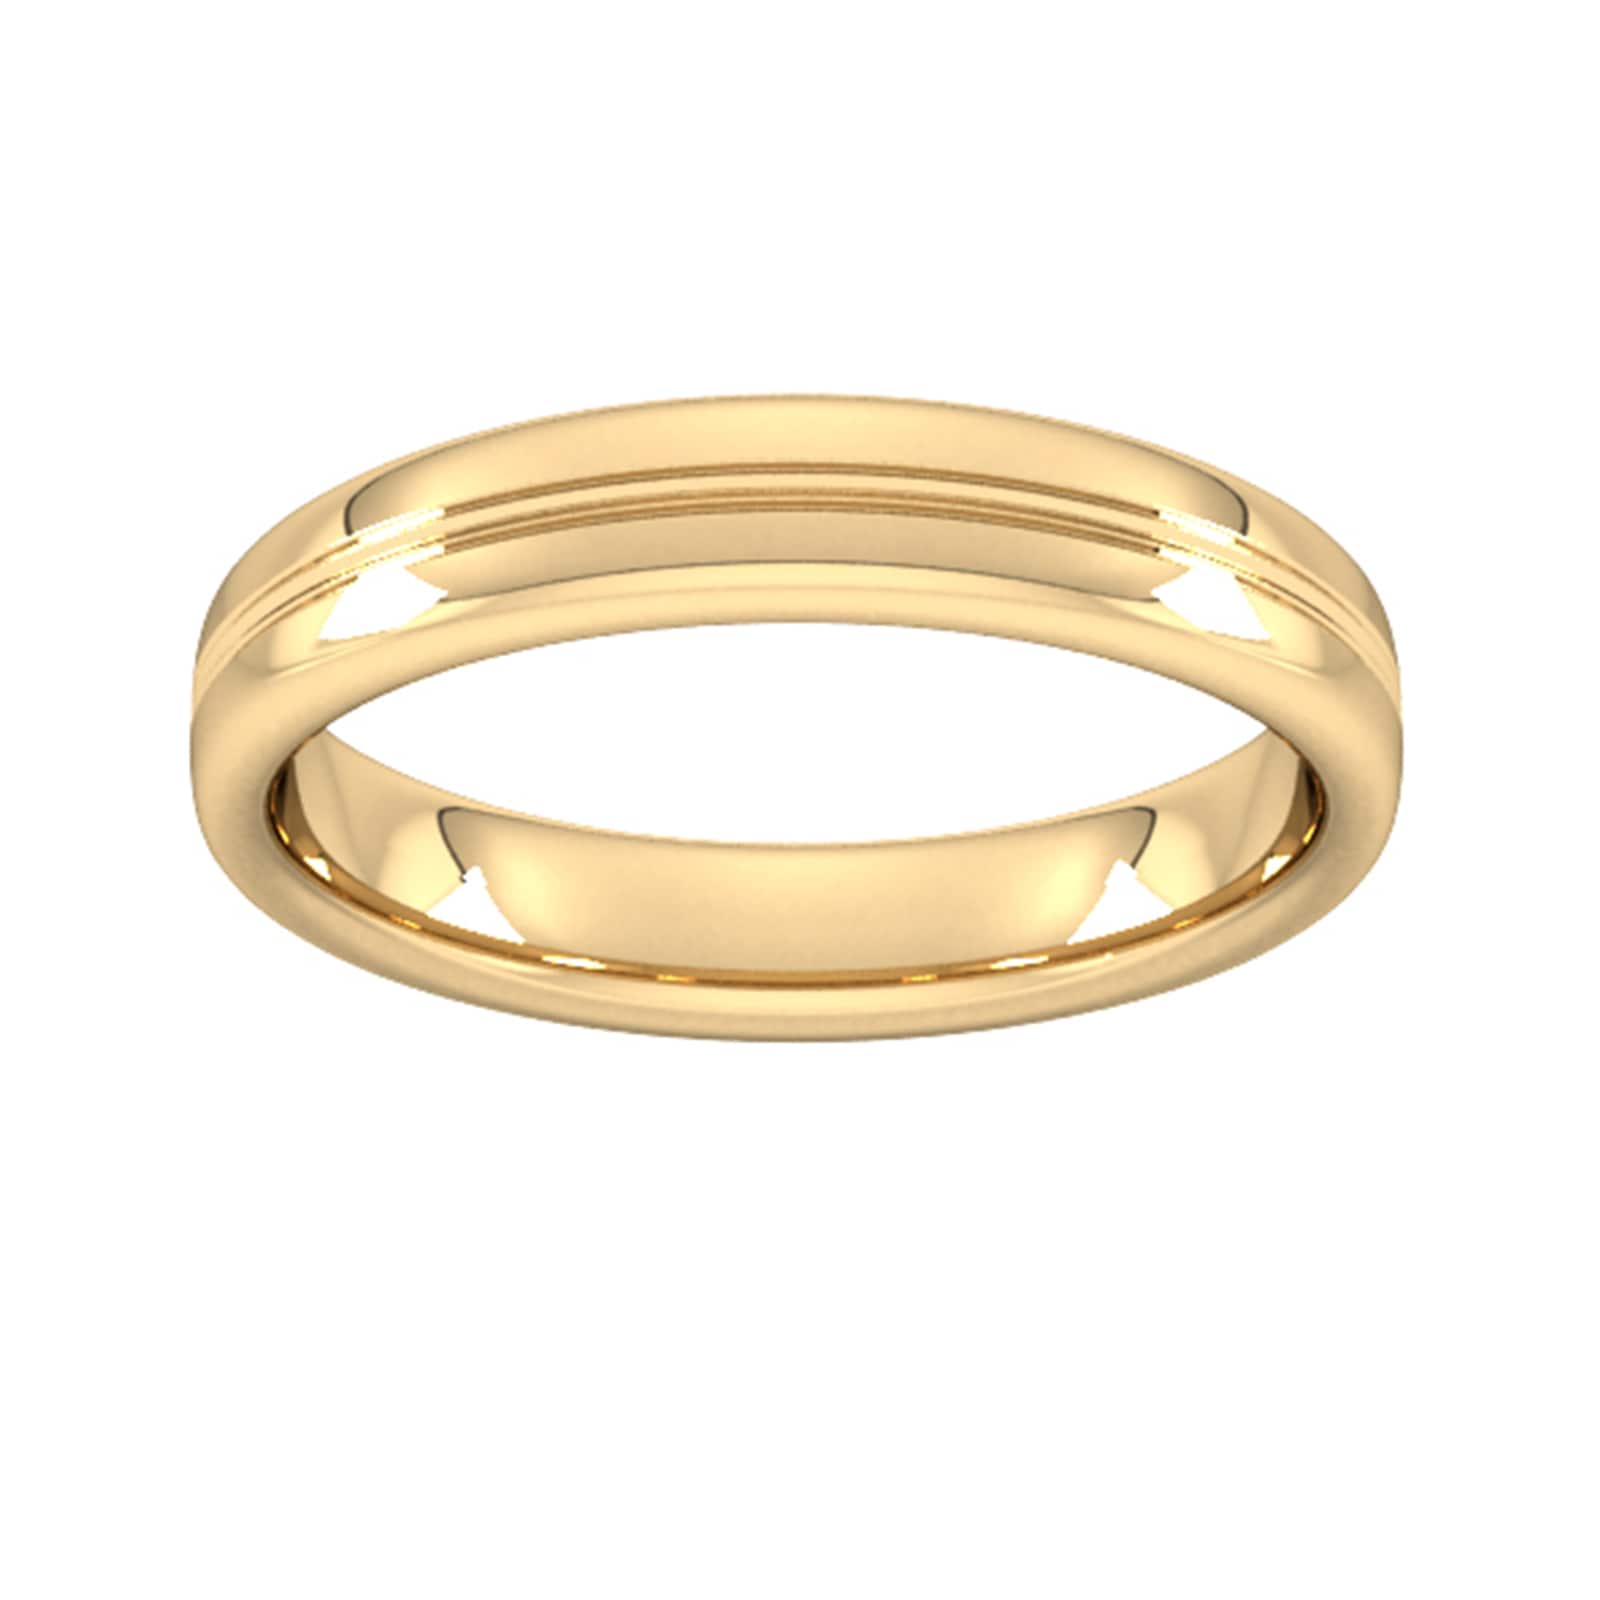 4mm slight court extra heavy grooved polished finish wedding ring in 9 carat yellow gold - ring size t